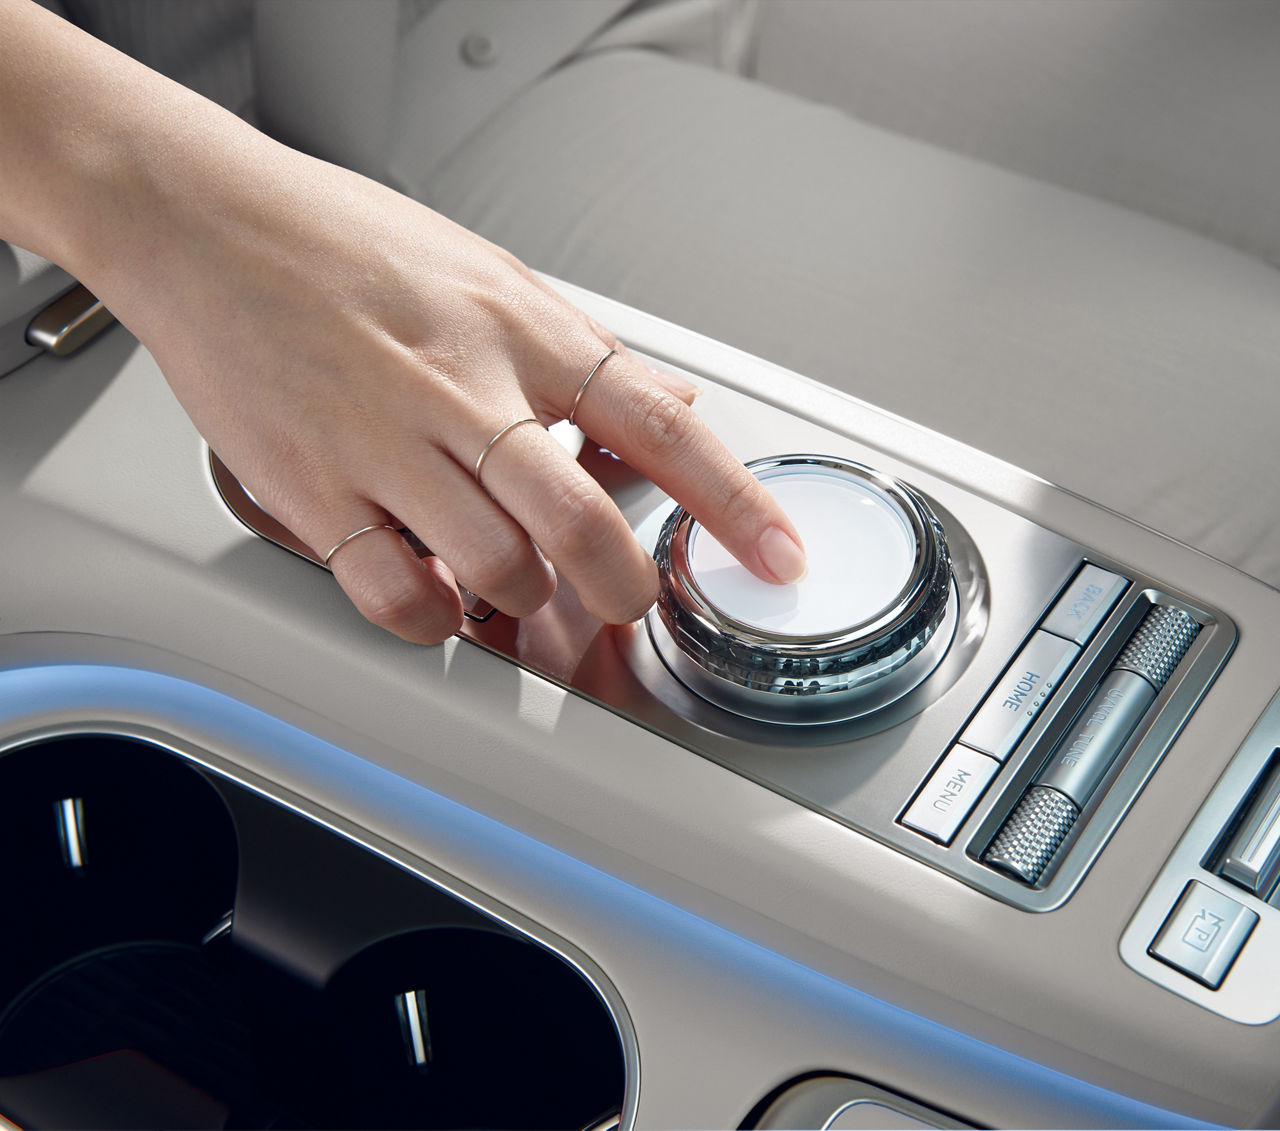 A hand operates a touch controller in the centre console of a car